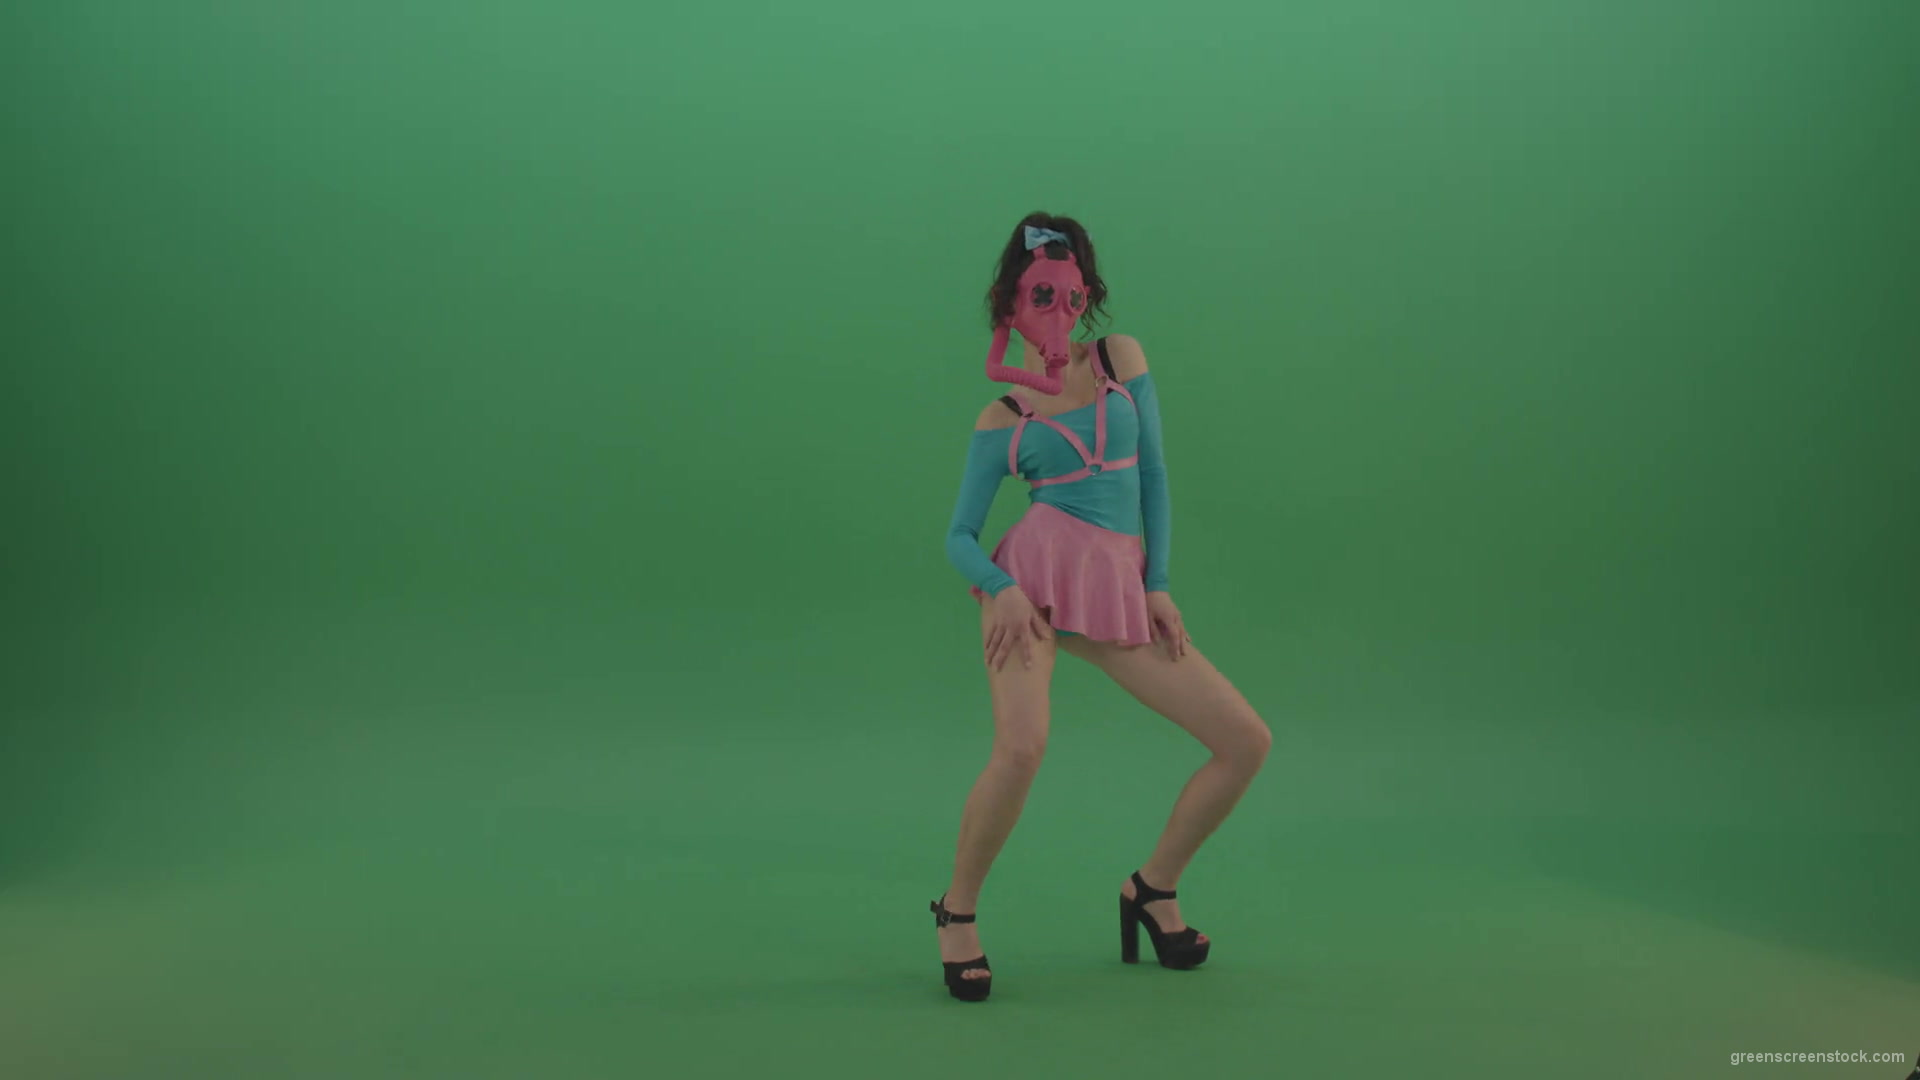 Rave-Go-Go-Dancing-girl-in-gas-mask-play-on-Green-Screen-4K-Video-Footage-1920_004 Green Screen Stock